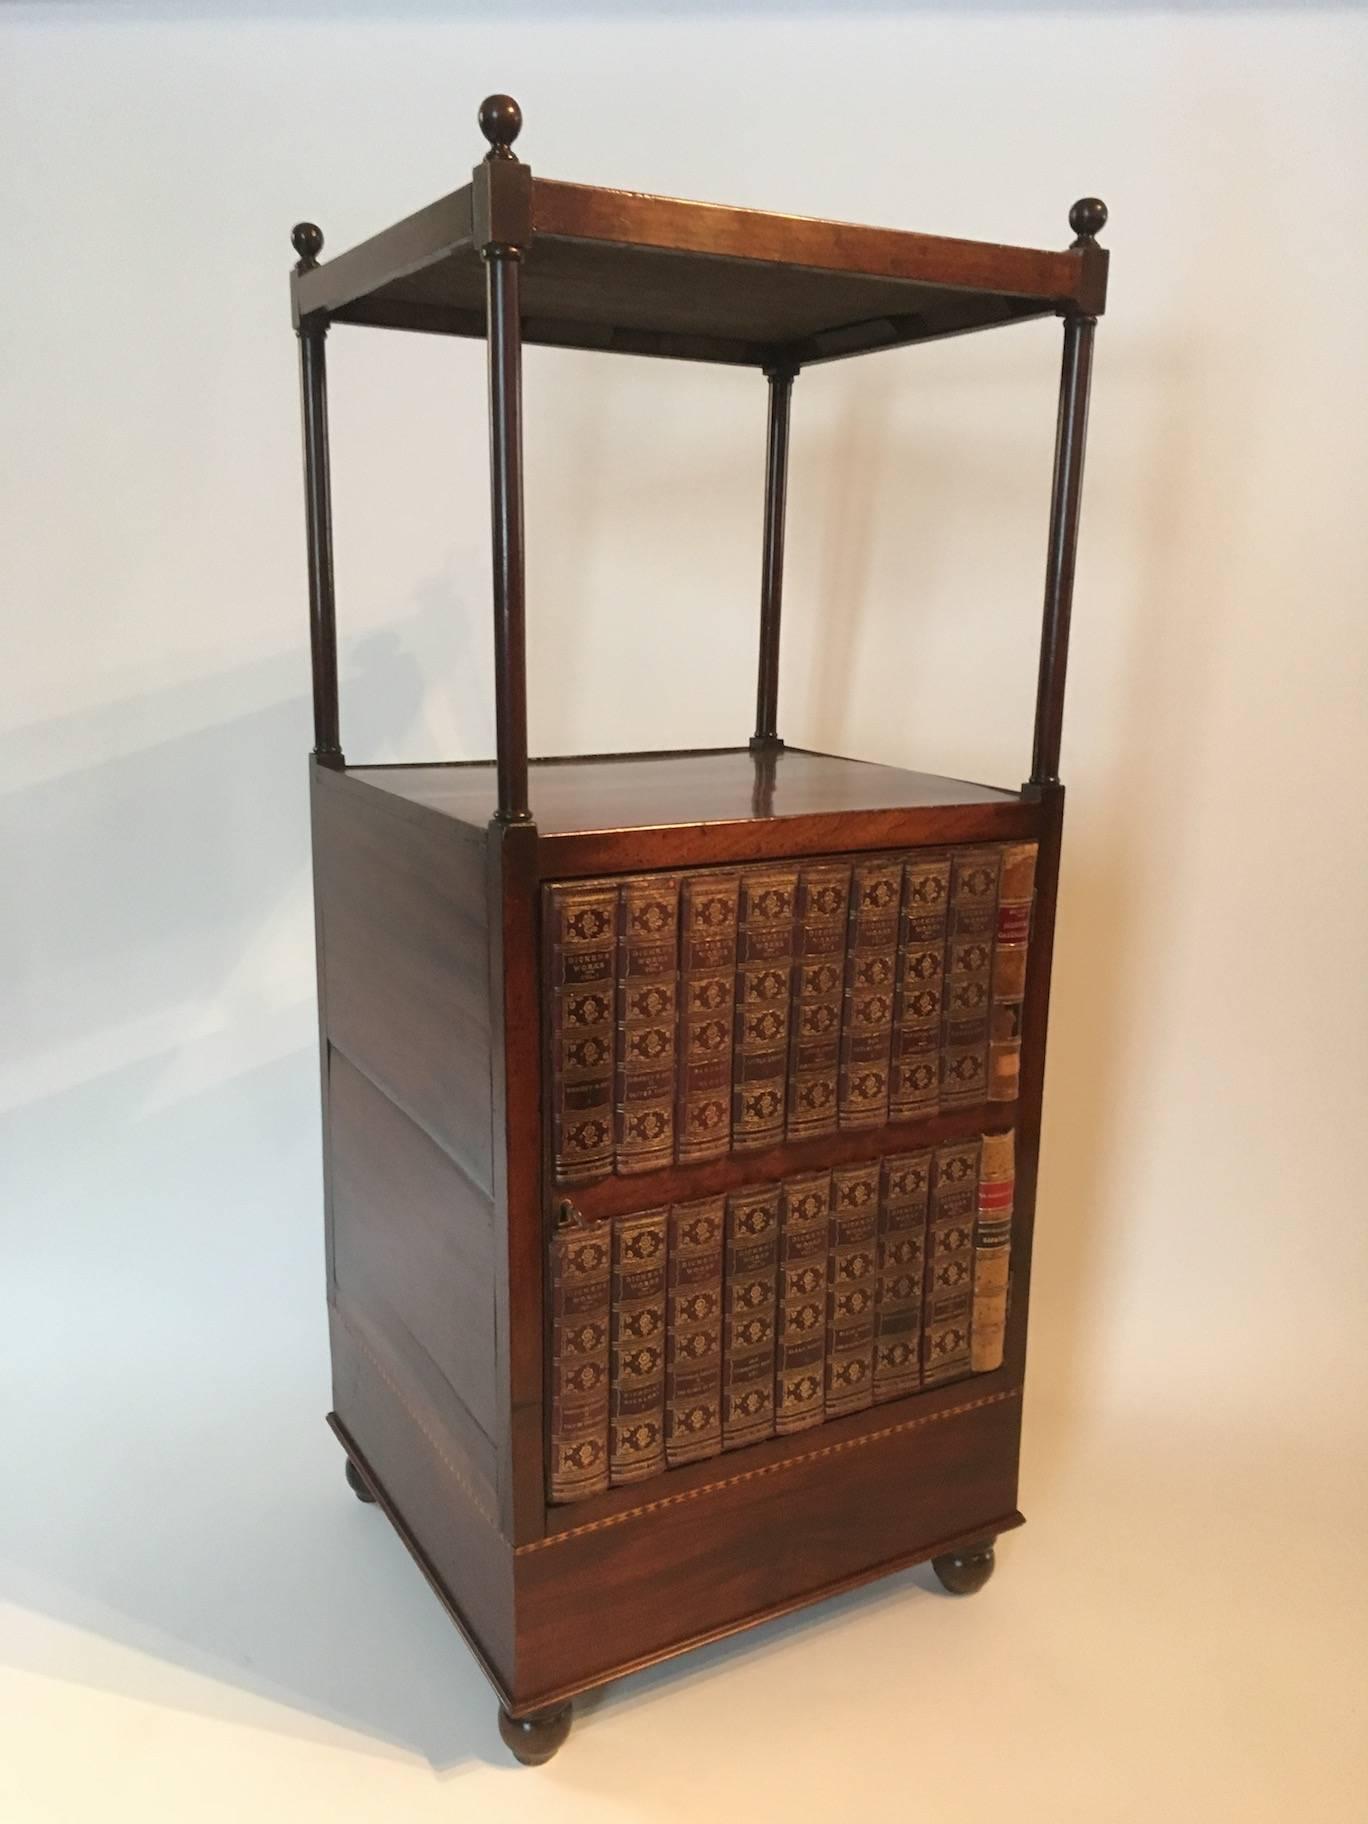 English Regency Period Mahogany Étagère or Library Stand, circa 1815 For Sale 4